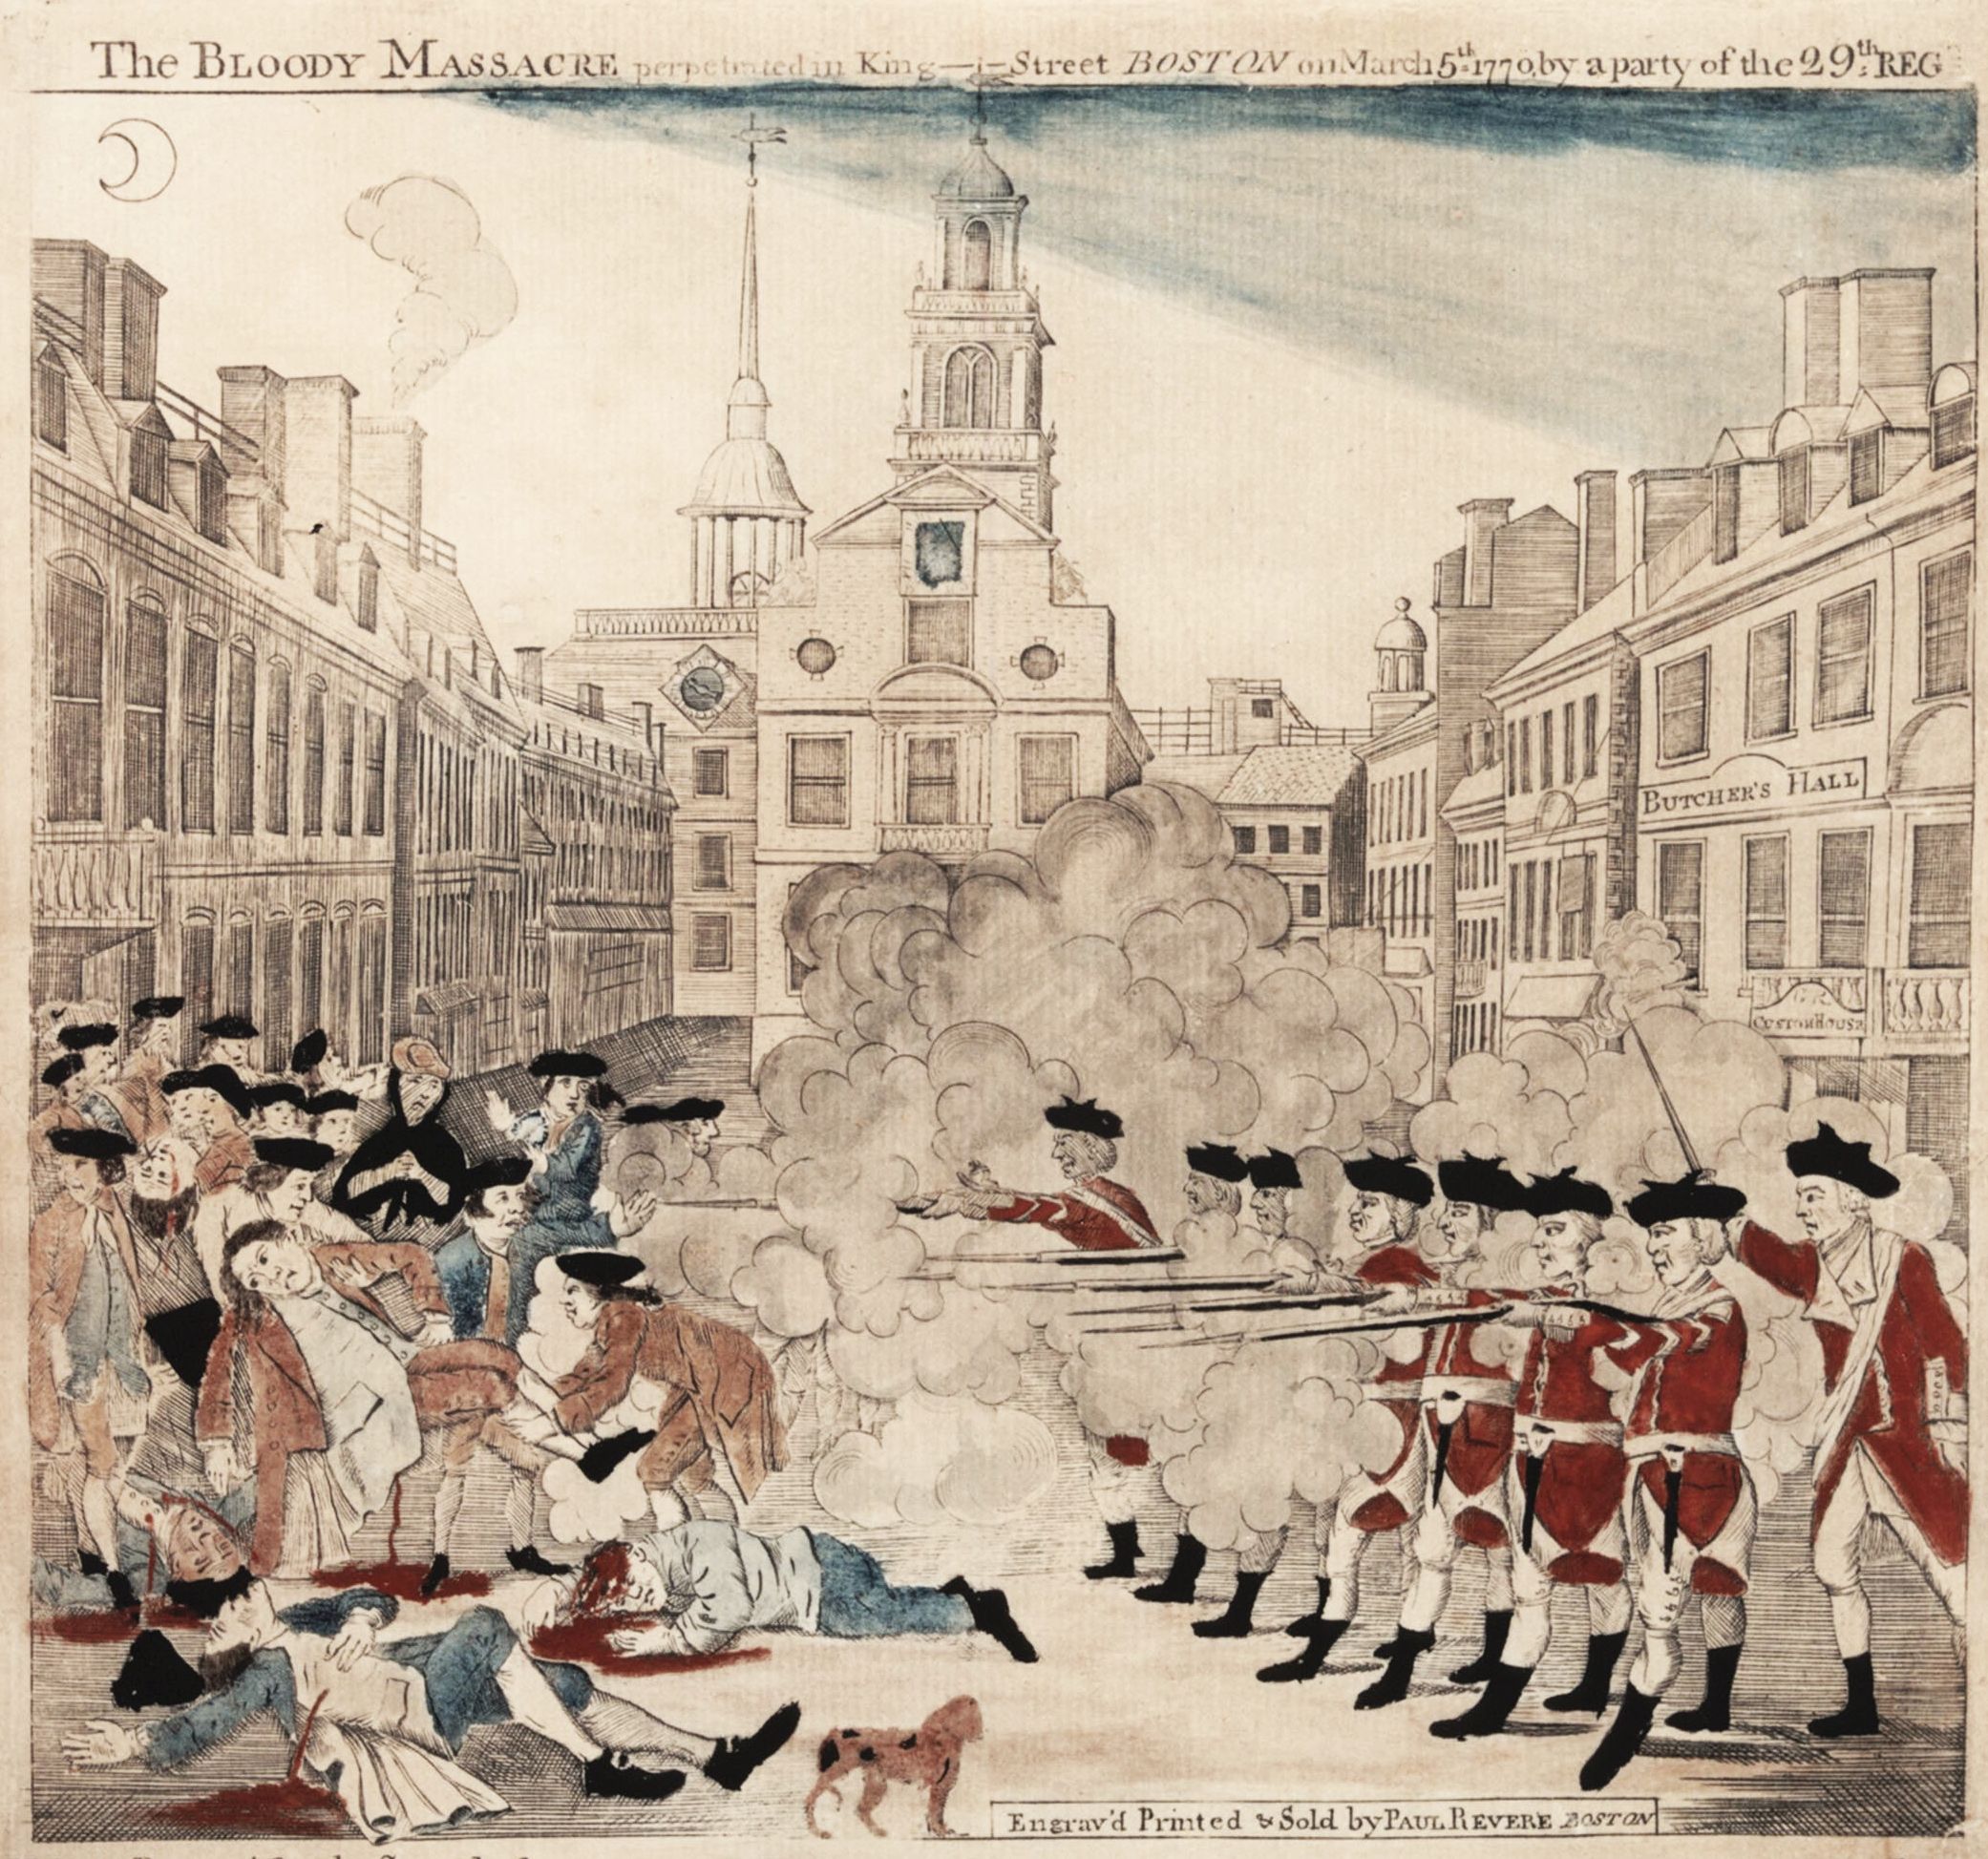 When British soldiers fired on a crowd of men in Boston, 